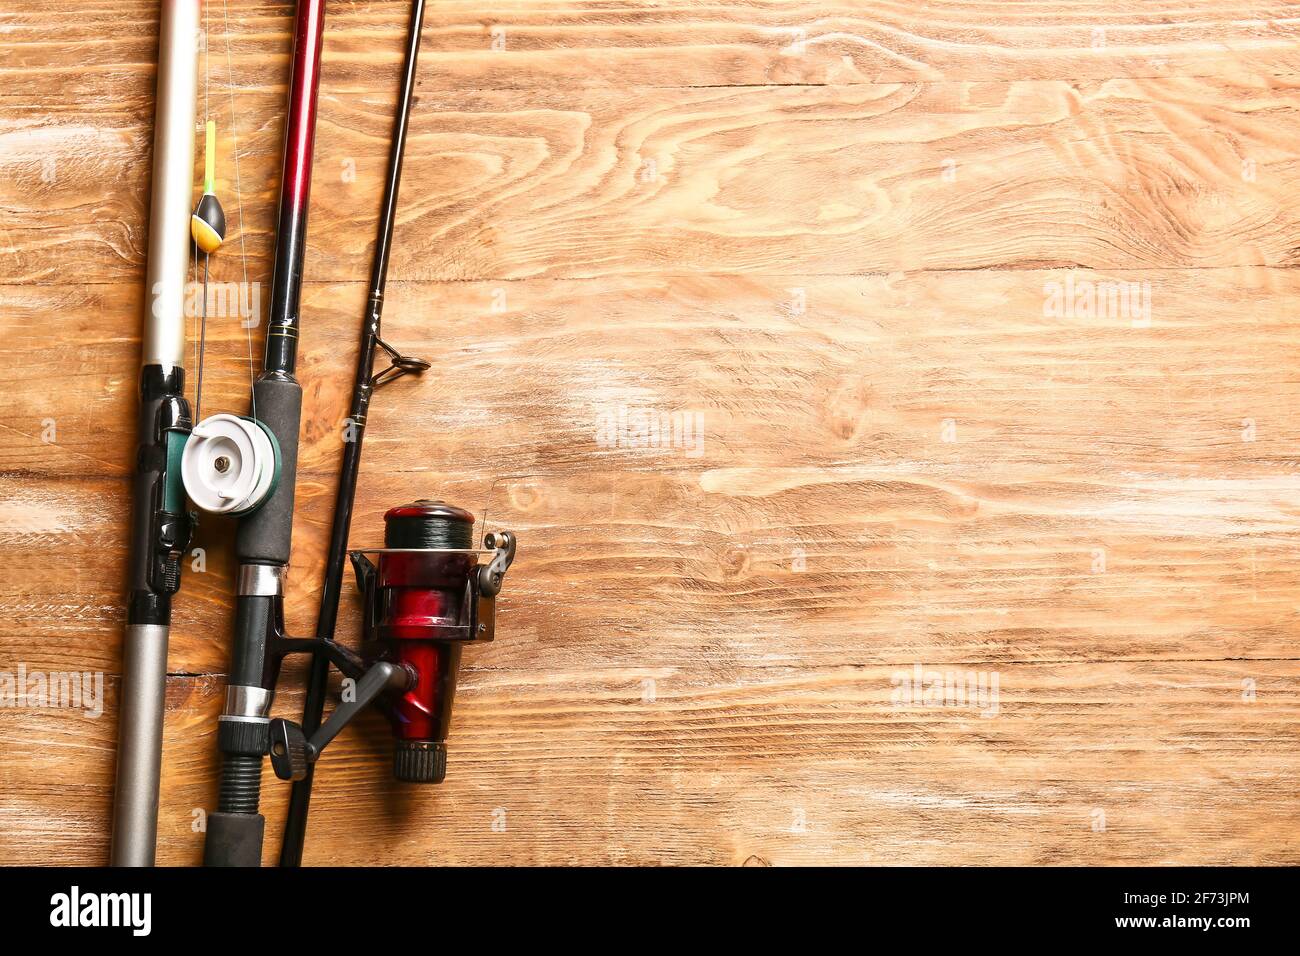 Different fishing rods on wooden background Stock Photo - Alamy